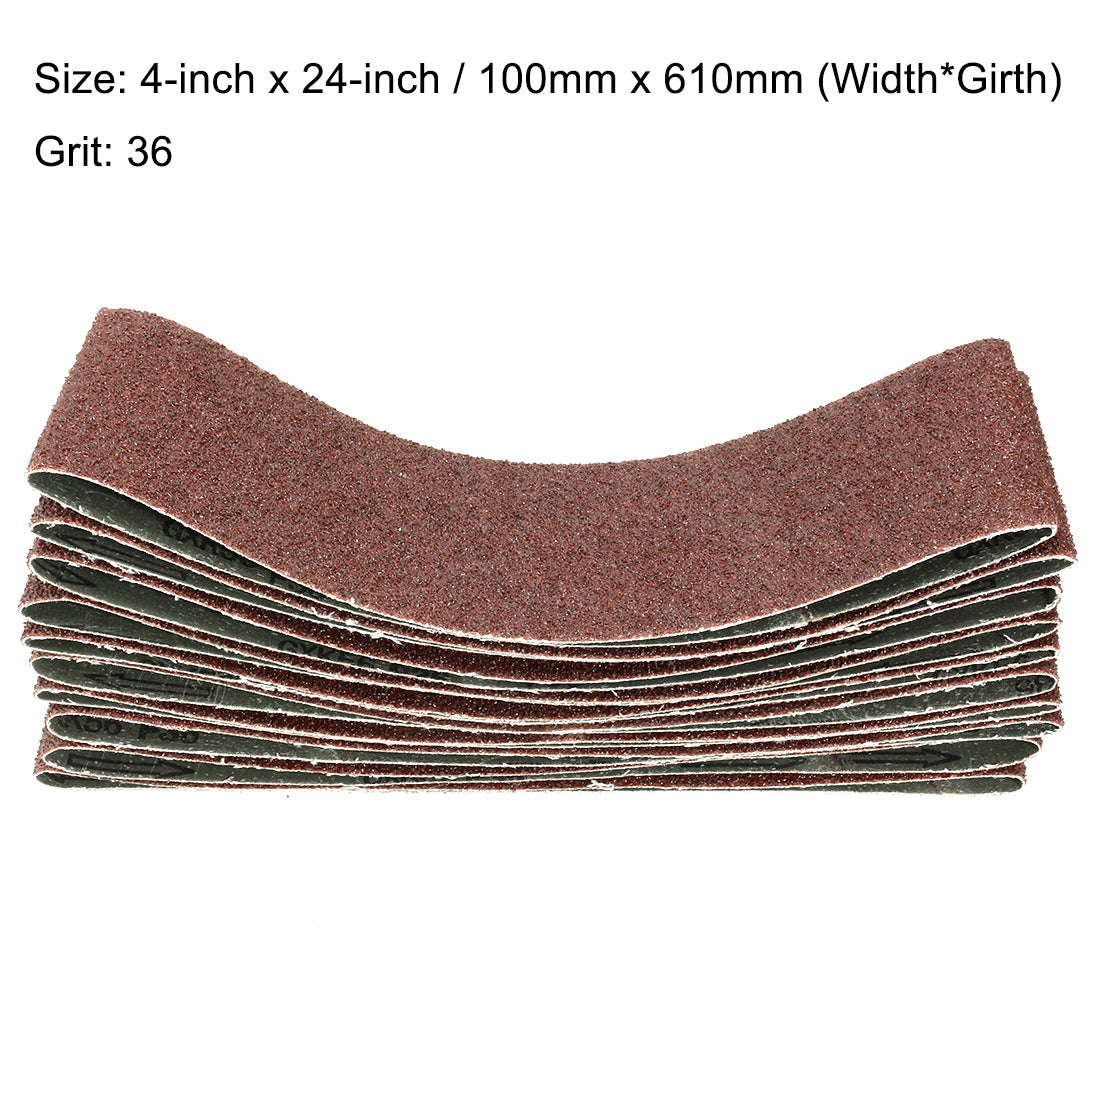 uxcell Uxcell 4-Inch x 24-Inch Aluminum Oxide Sanding Belt 36 Grits Lapped Joint 10pcs